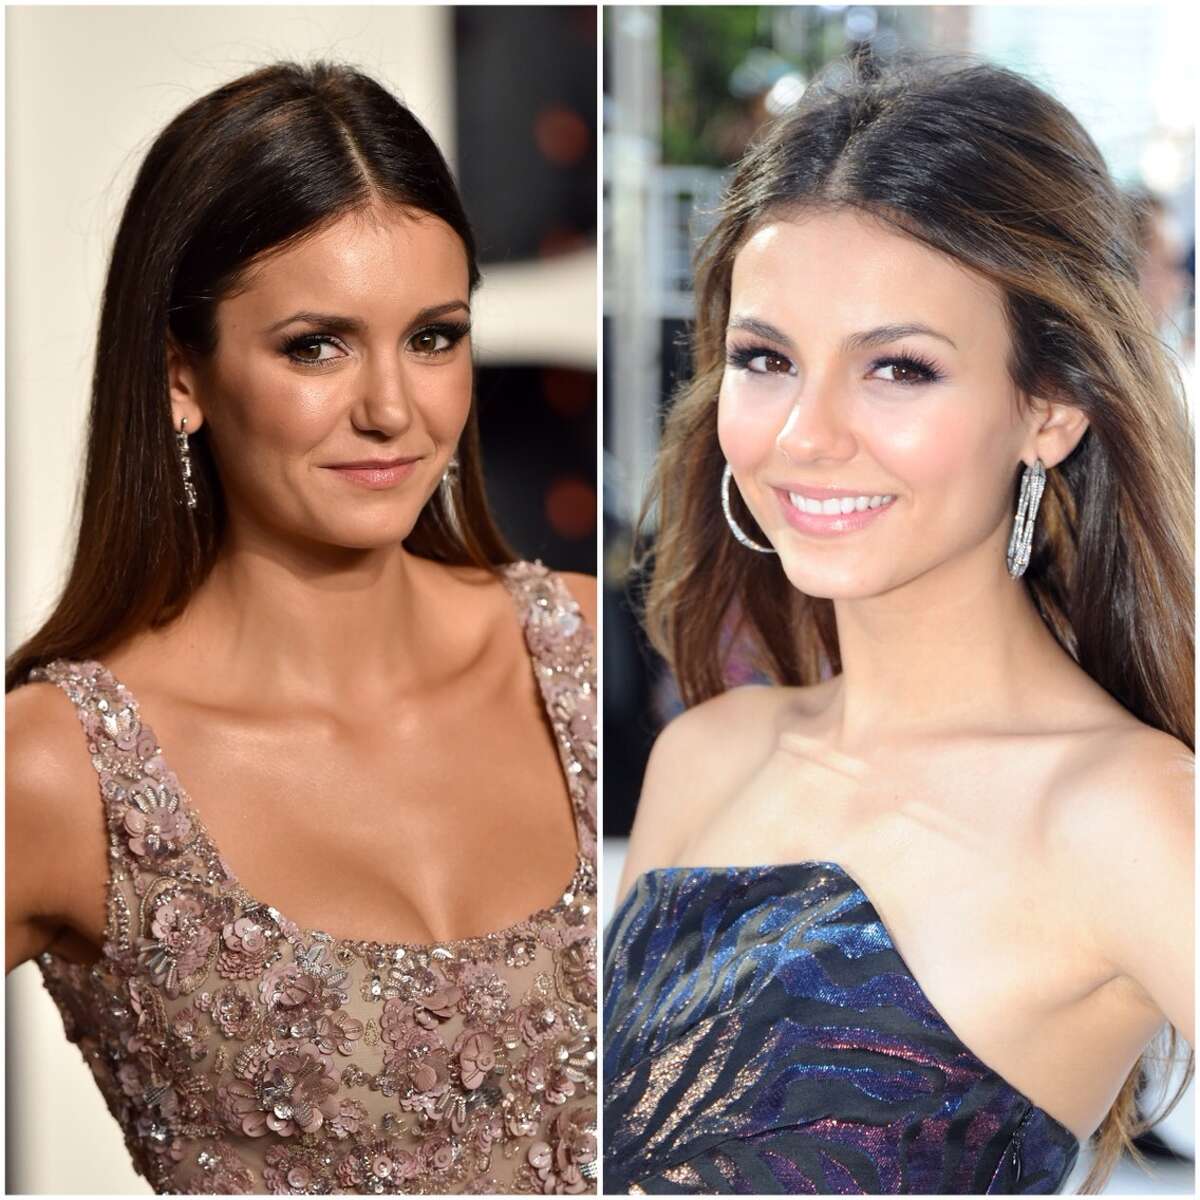 Nina Dobrev and Victoria Justice Both actresses could seriously pass as sisters. Image credit: Getty/ Axelle/Bauer-Griffin; Getty/ Jeff Kravitz; FilmMagic, Inc. 